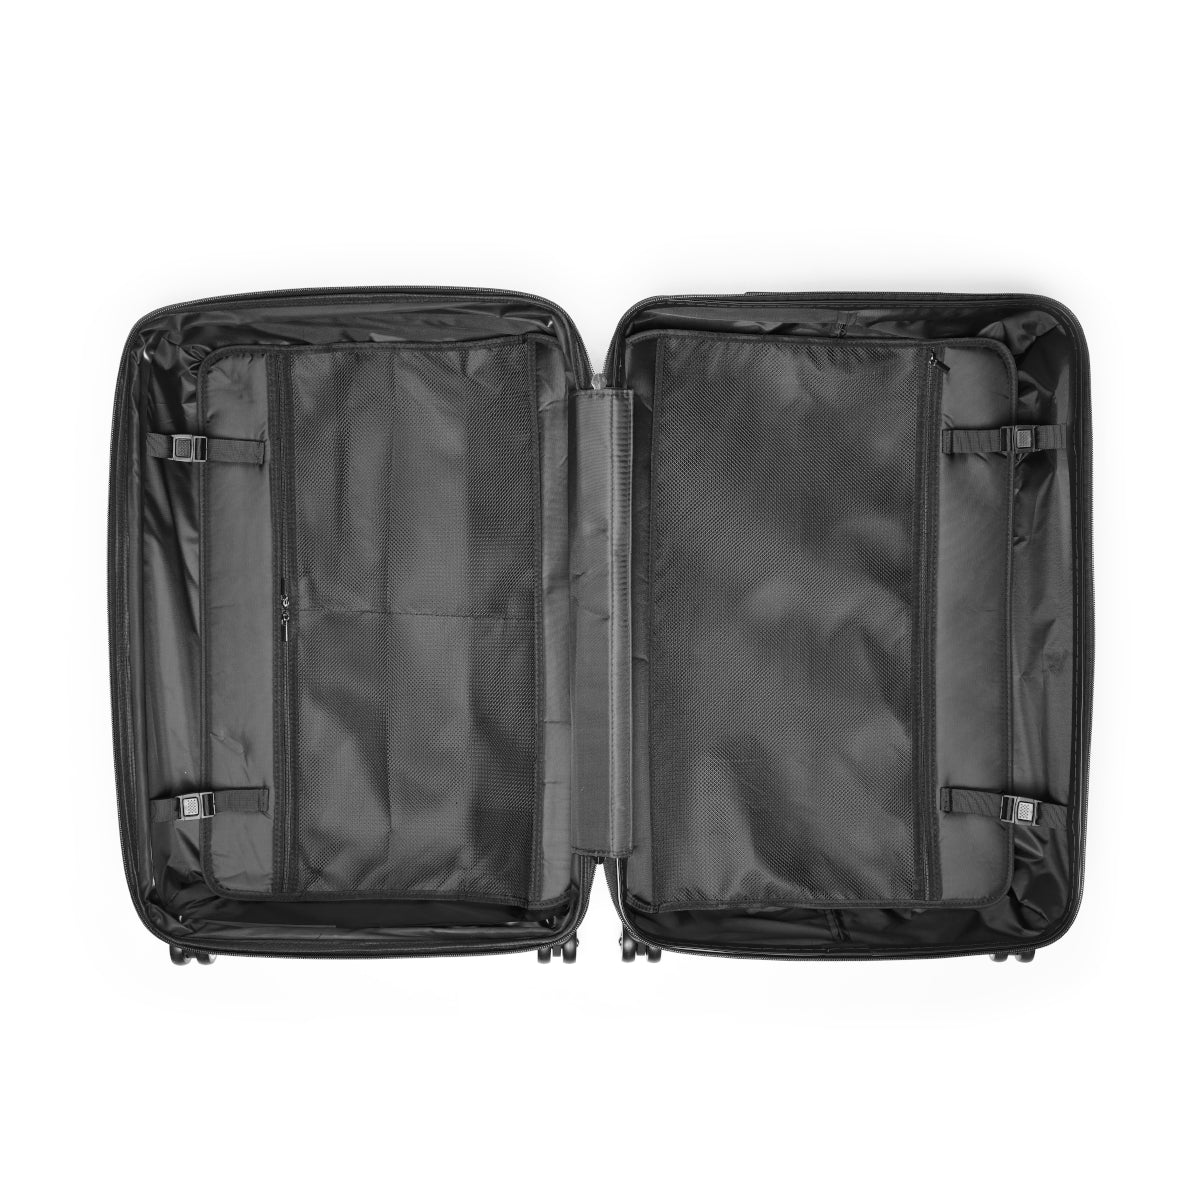 Getrott Scrambled Eggs in Microwave Black Cabin Suitcase Inner Pockets Extended Storage Adjustable Telescopic Handle Inner Pockets Double wheeled Polycarbonate Hard-shell Built-in Lock